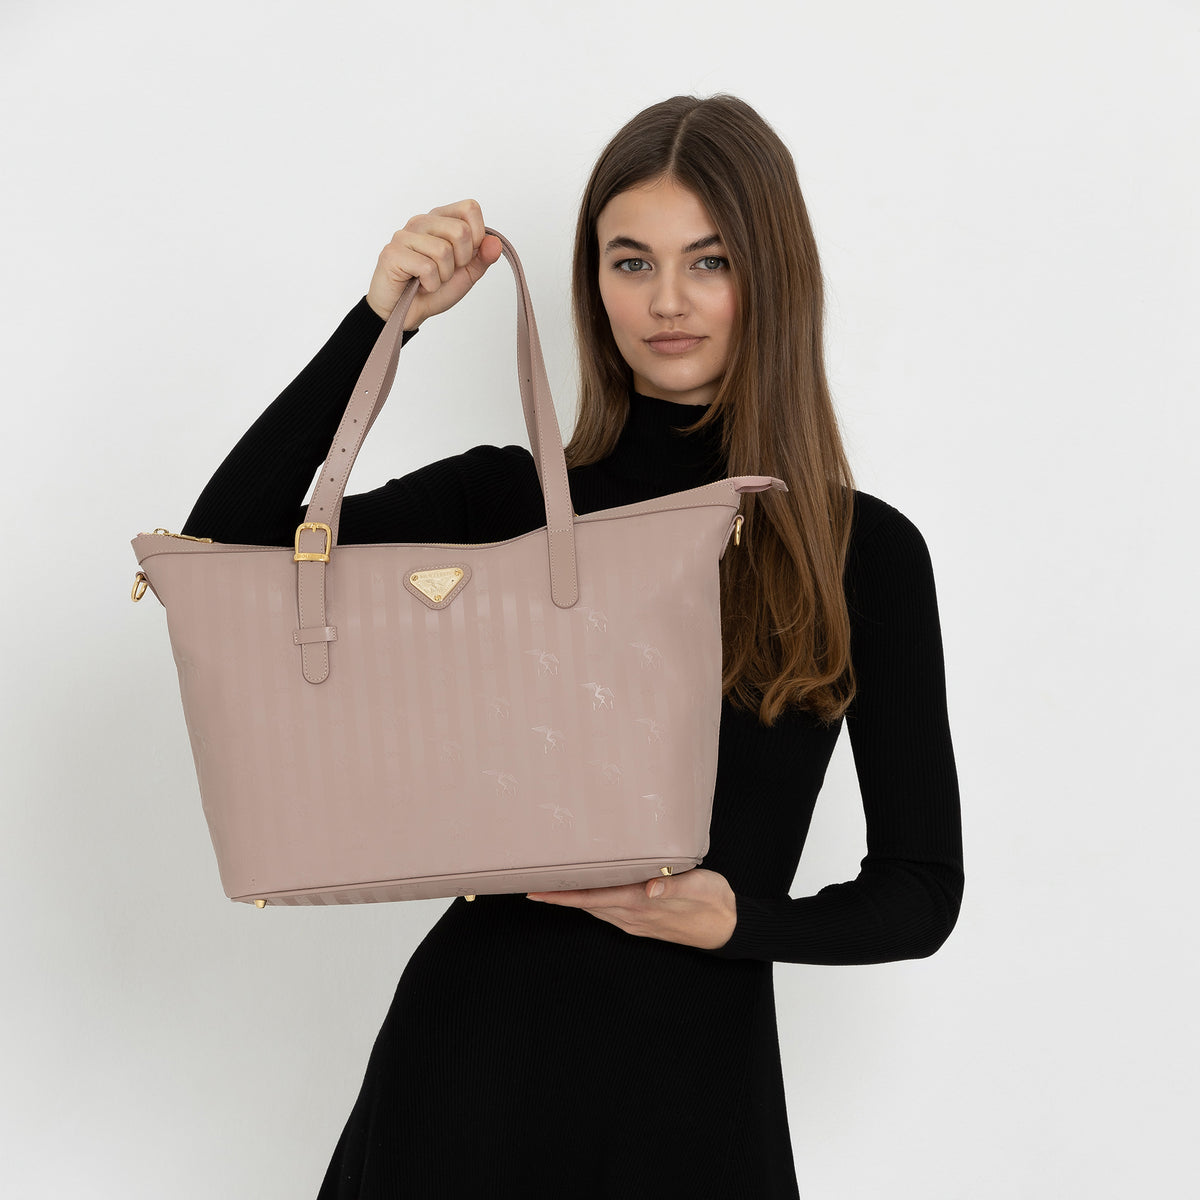 GISWIL | Businesstasche soft rosé/gold - on body